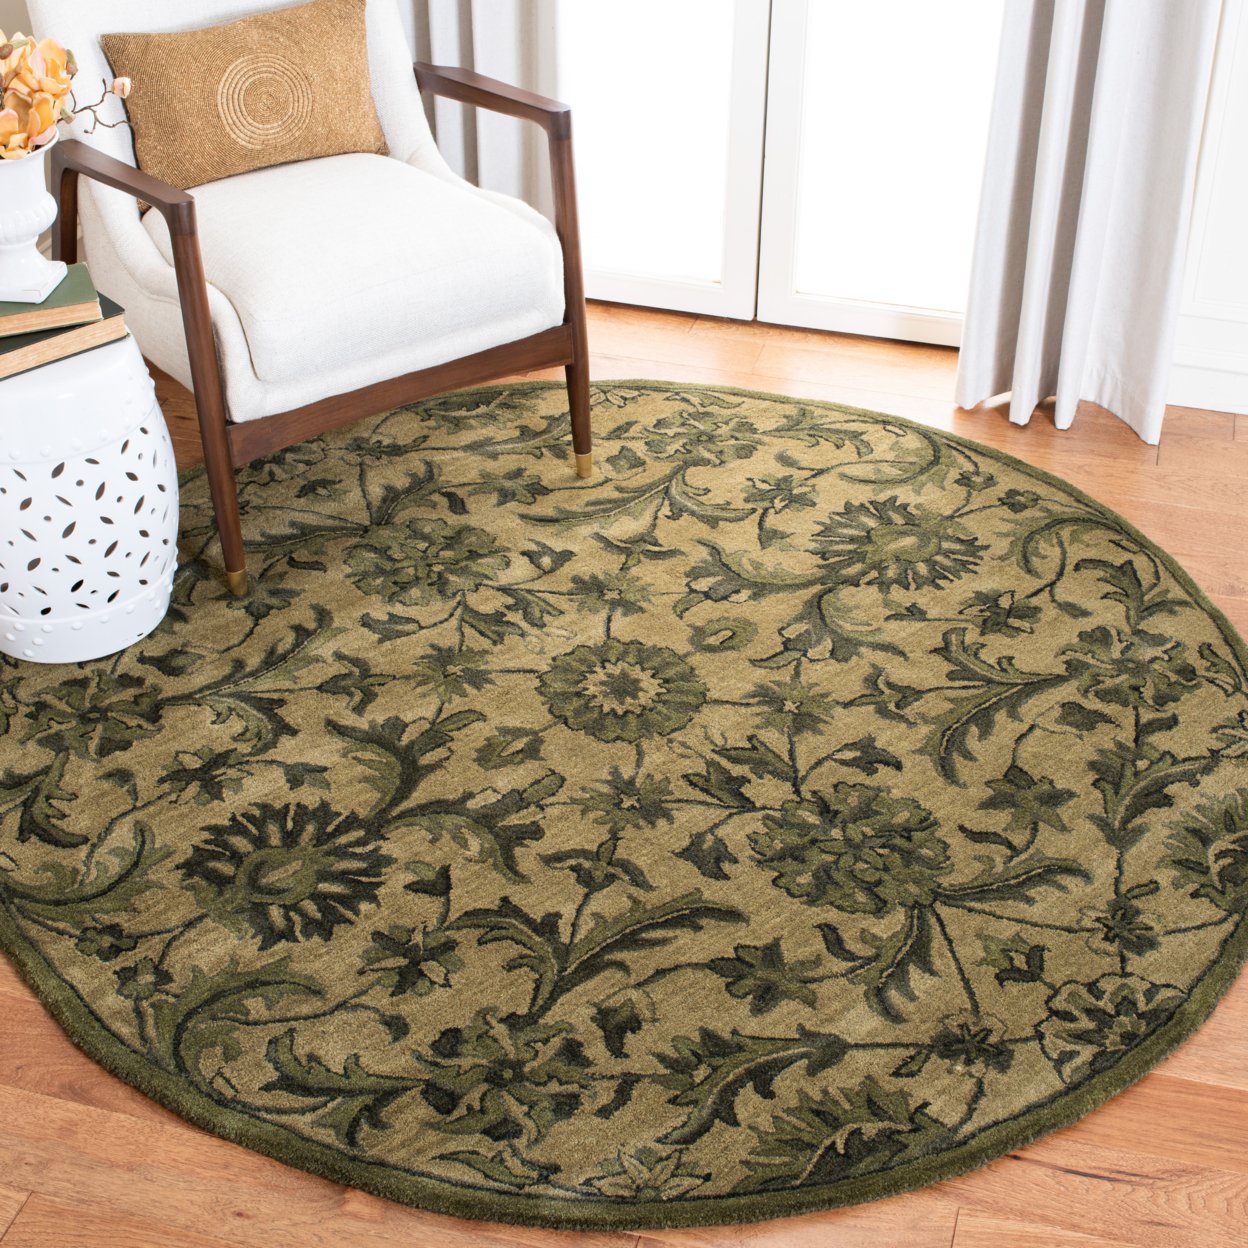 SAFAVIEH Antiquity AT824A Handmade Olive / Green Rug - 2' 3 X 4'